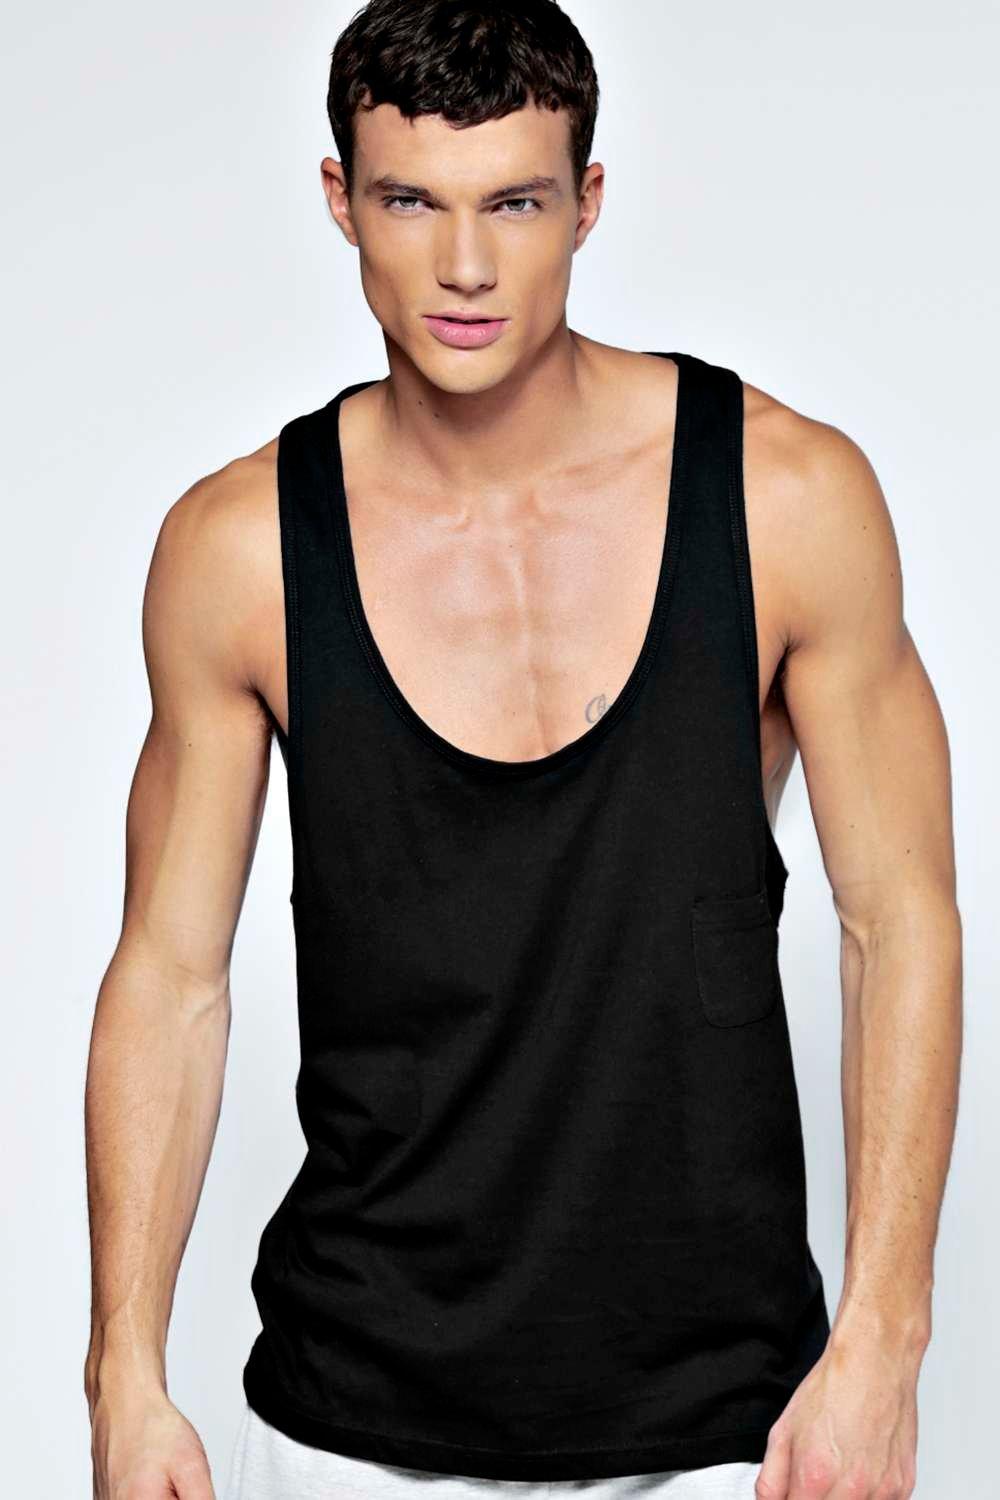 Boohoo Mens Extreme Muscle Fit Vest with Pocket | eBay